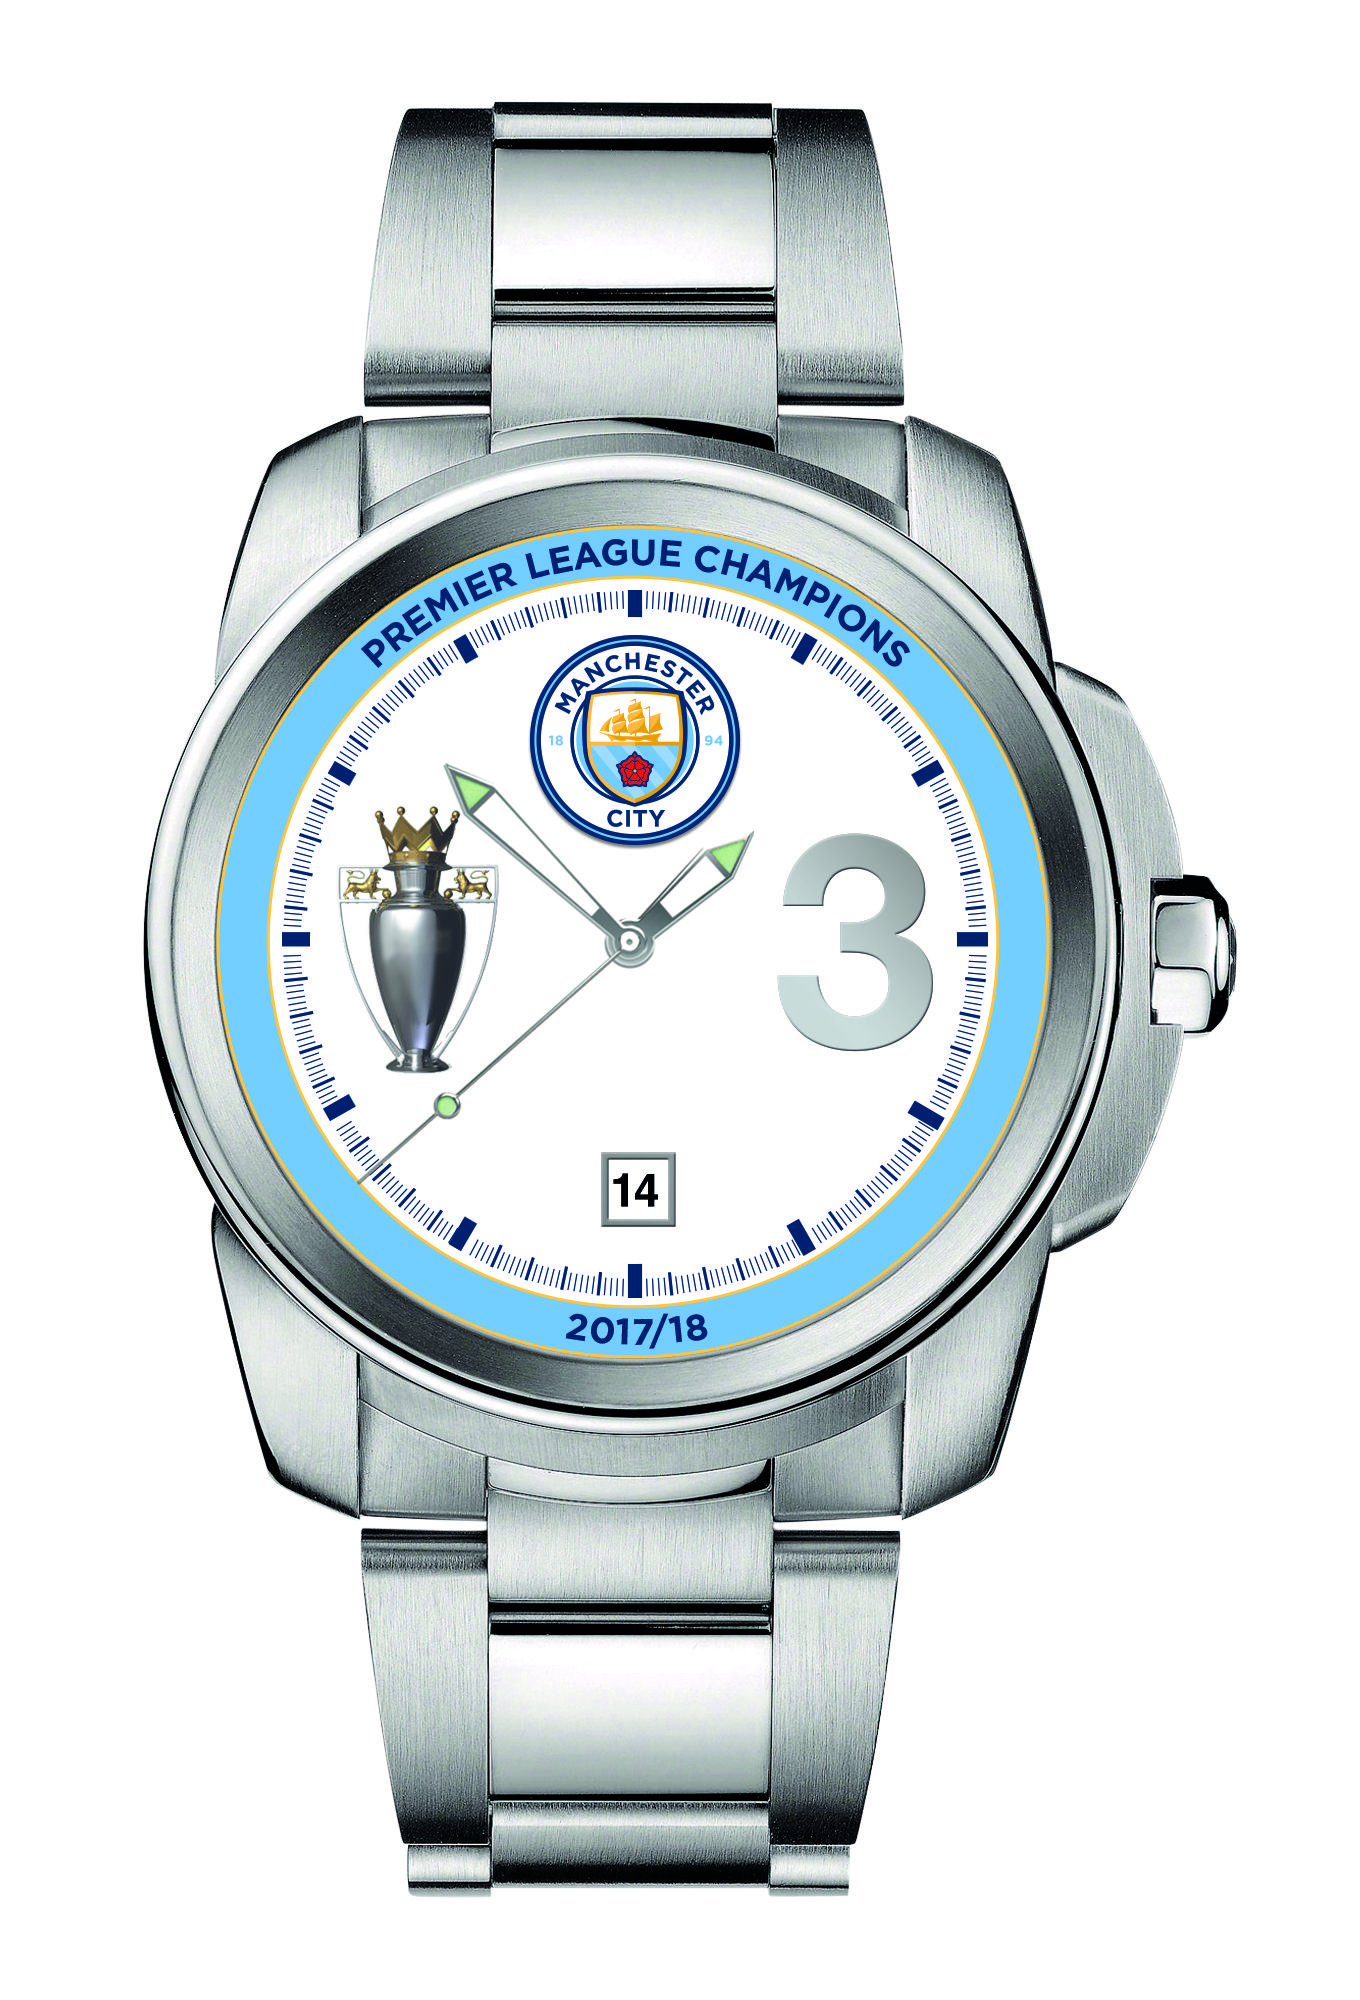 Bellagio Europe Seals Deal To Make Winners Watches For Manchester City Fans